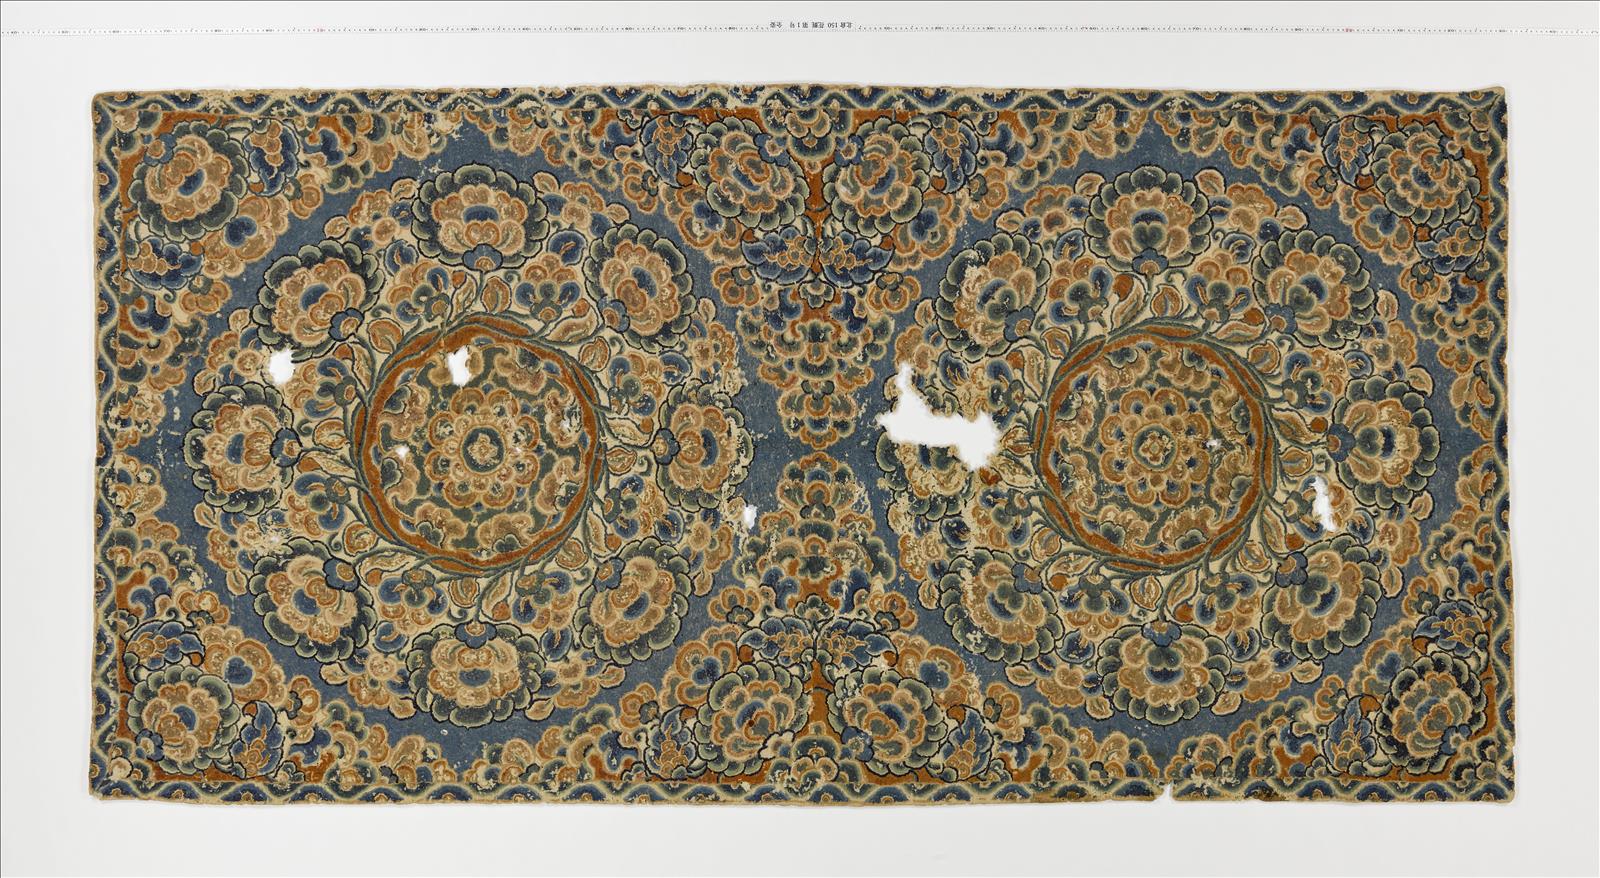 Felt rug with floral designs, No. 1. - Shosoin